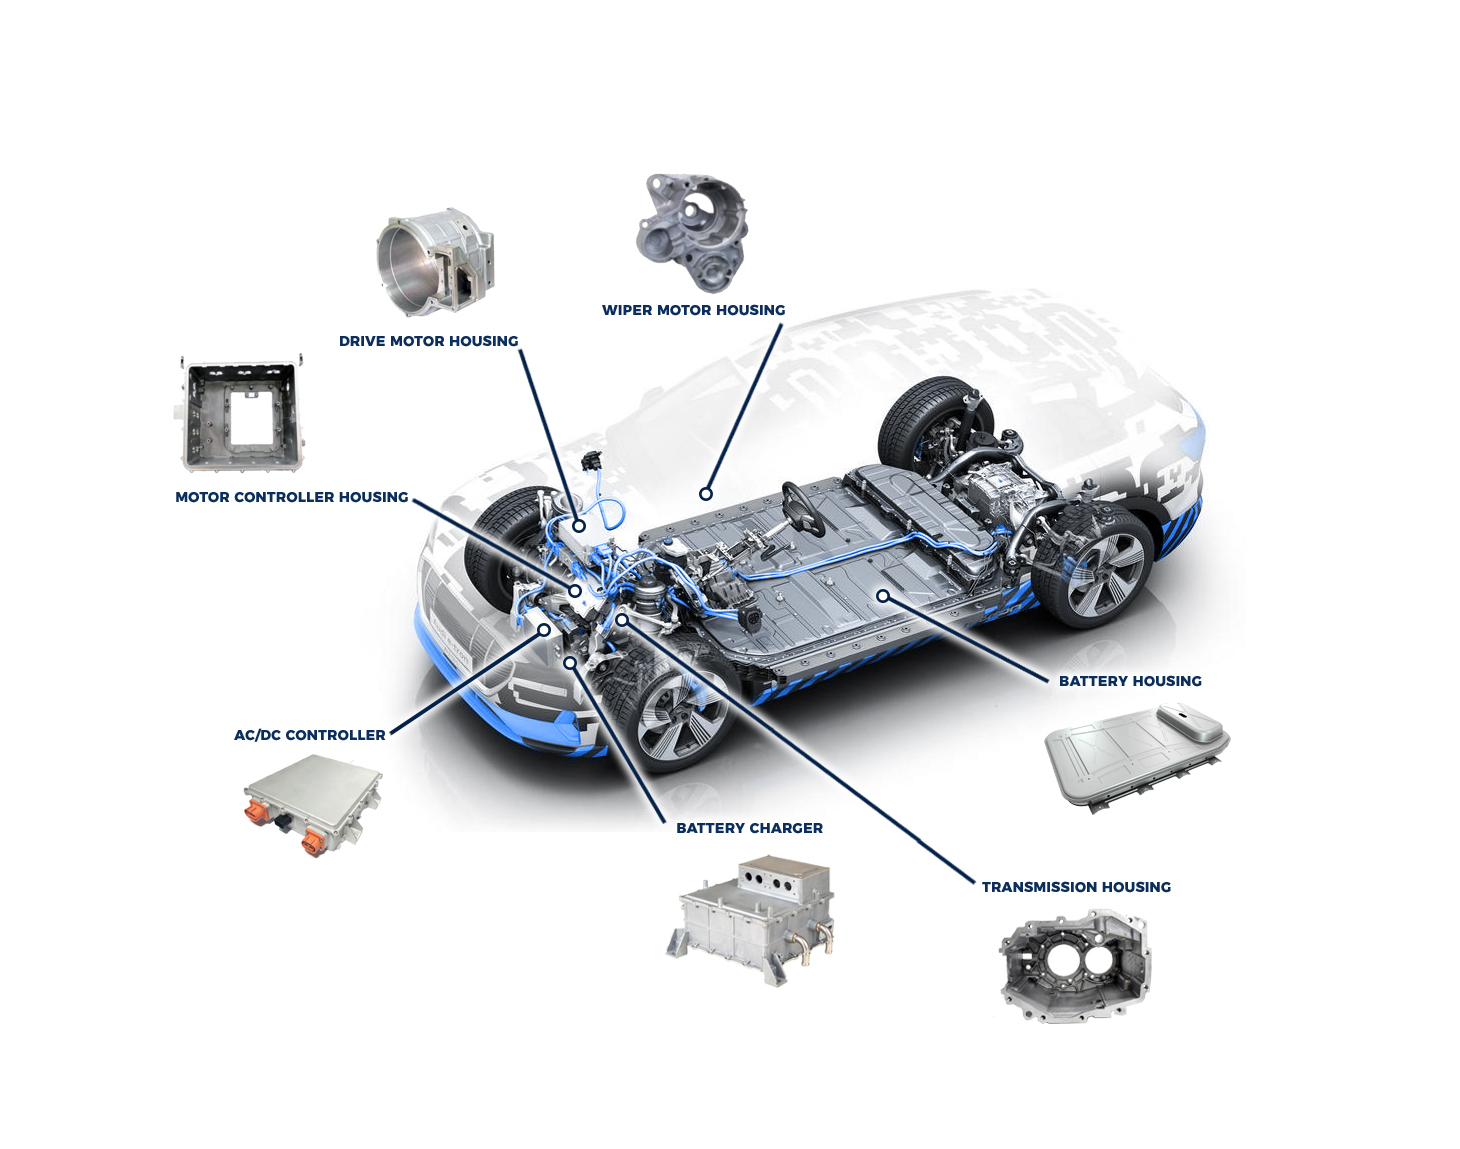 TOP 3 Aluminum Die Casting Application of Electric Vehicle and 5G Telecommunications